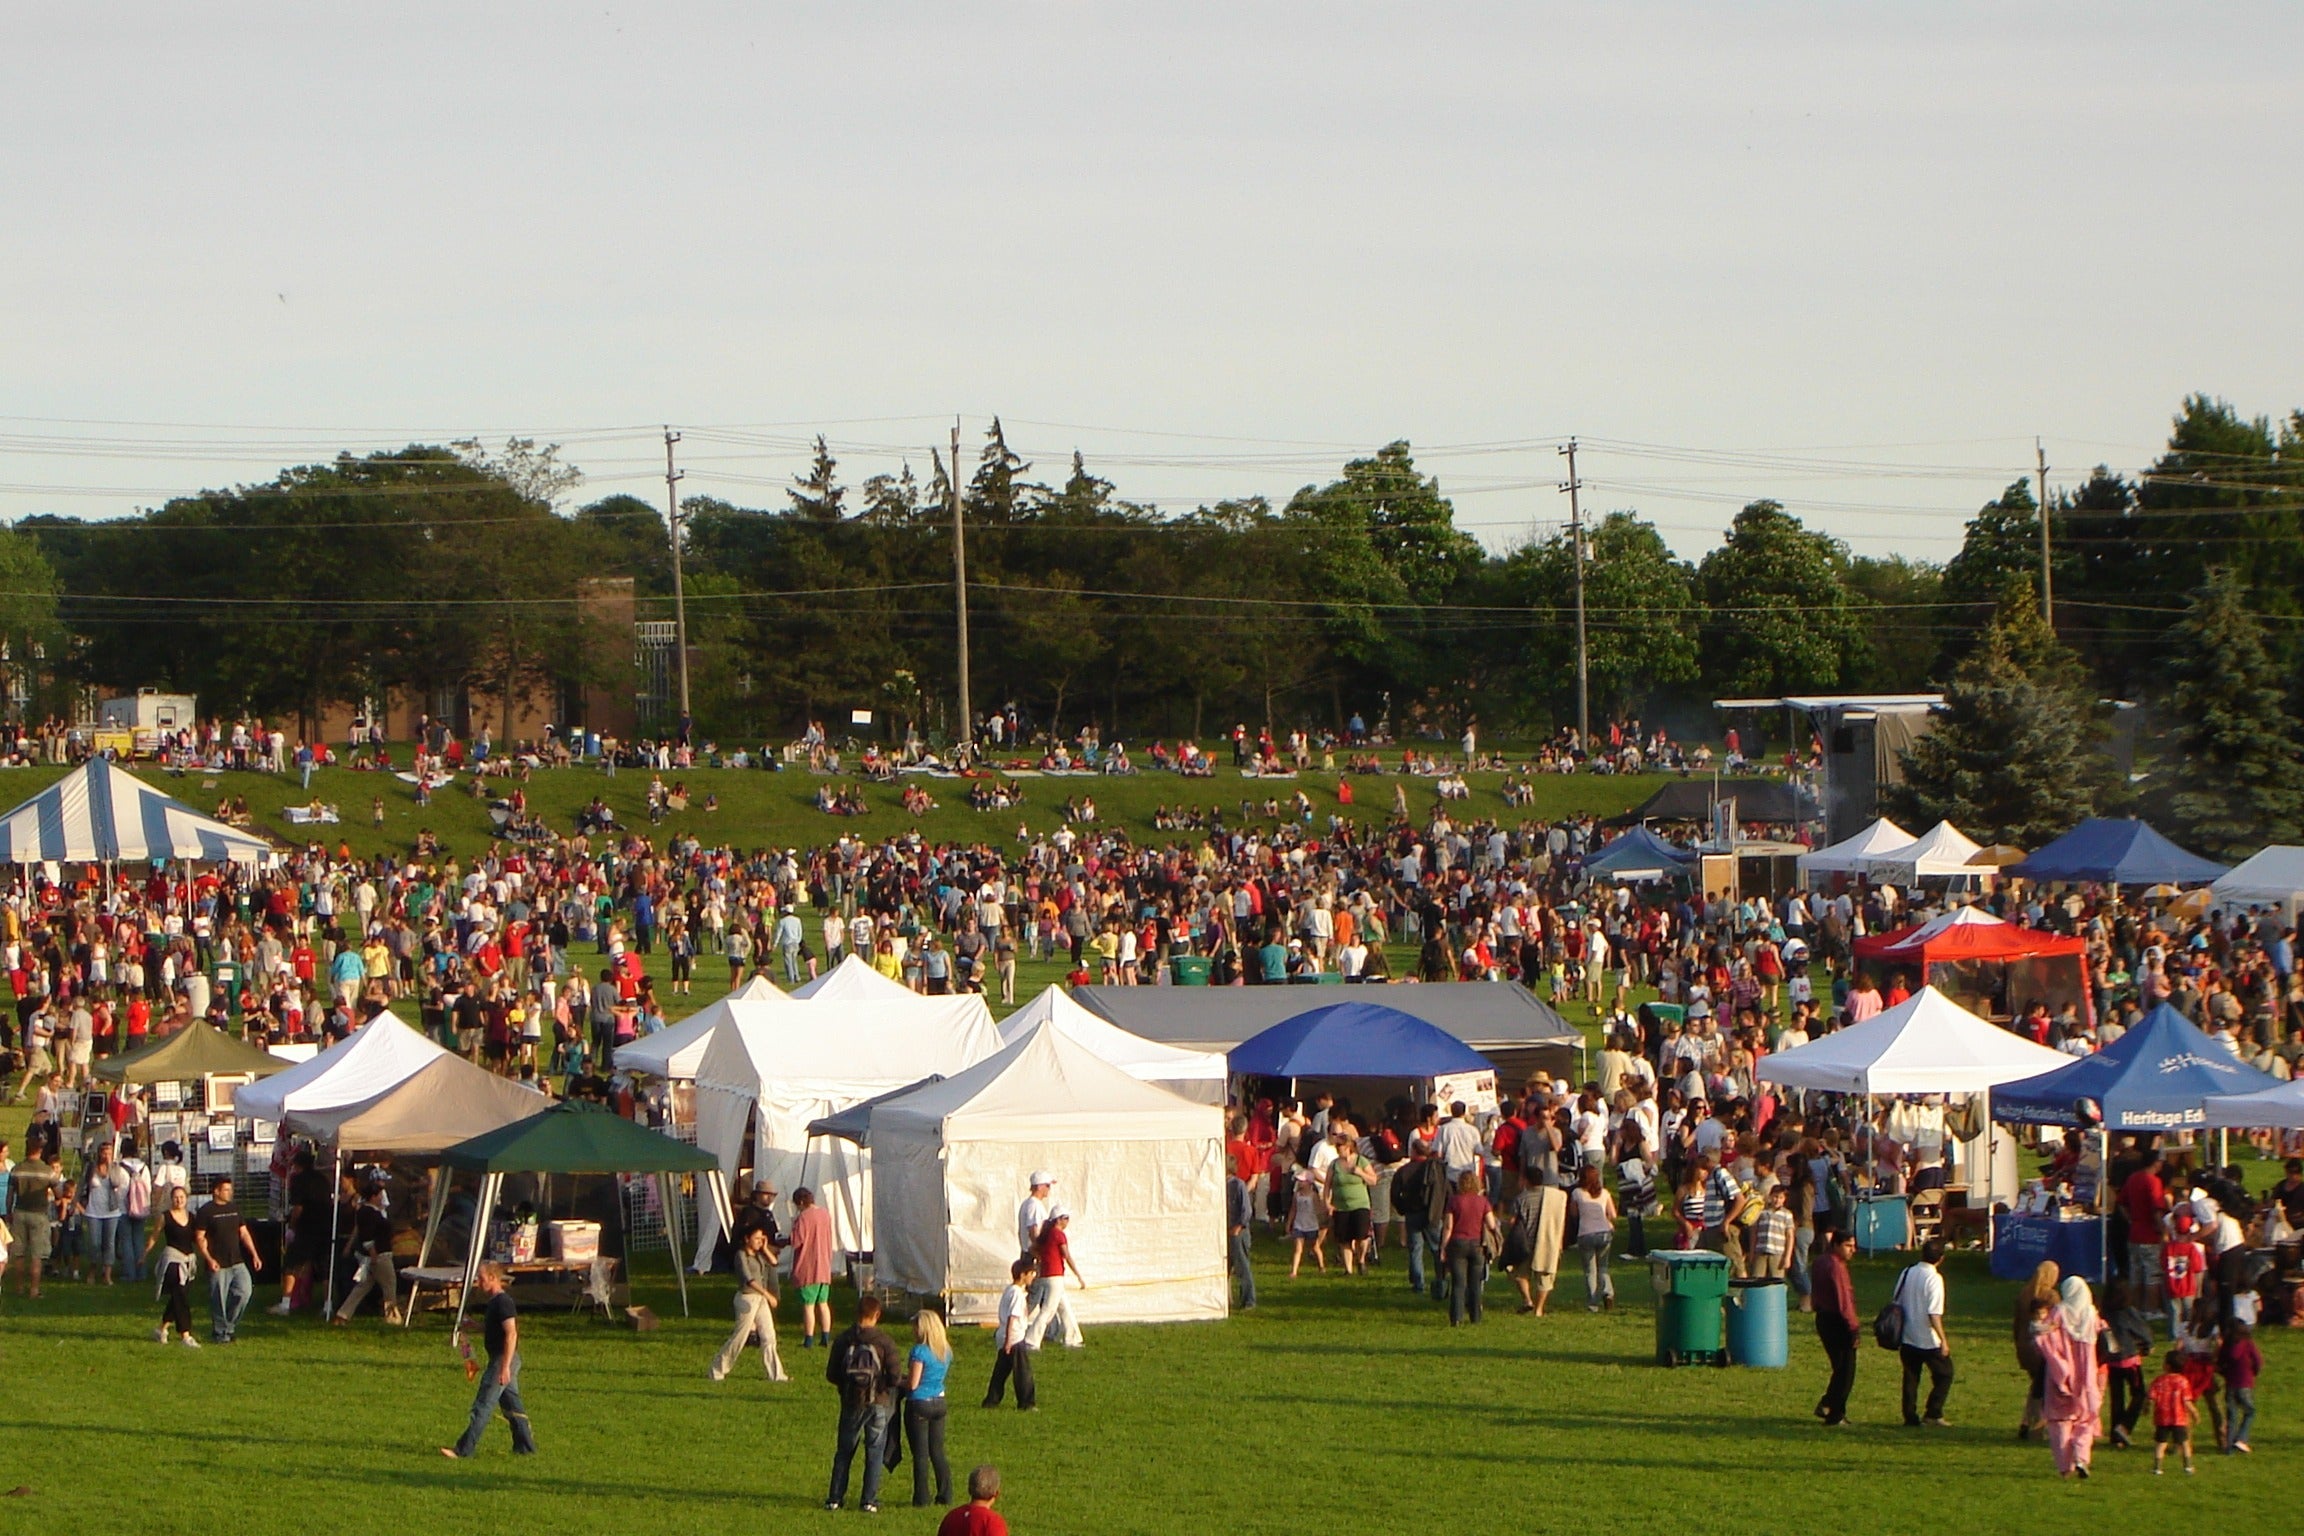 A large crowd gatherings on the Colombia Lake fields, where various tents are set up for Canada Day.